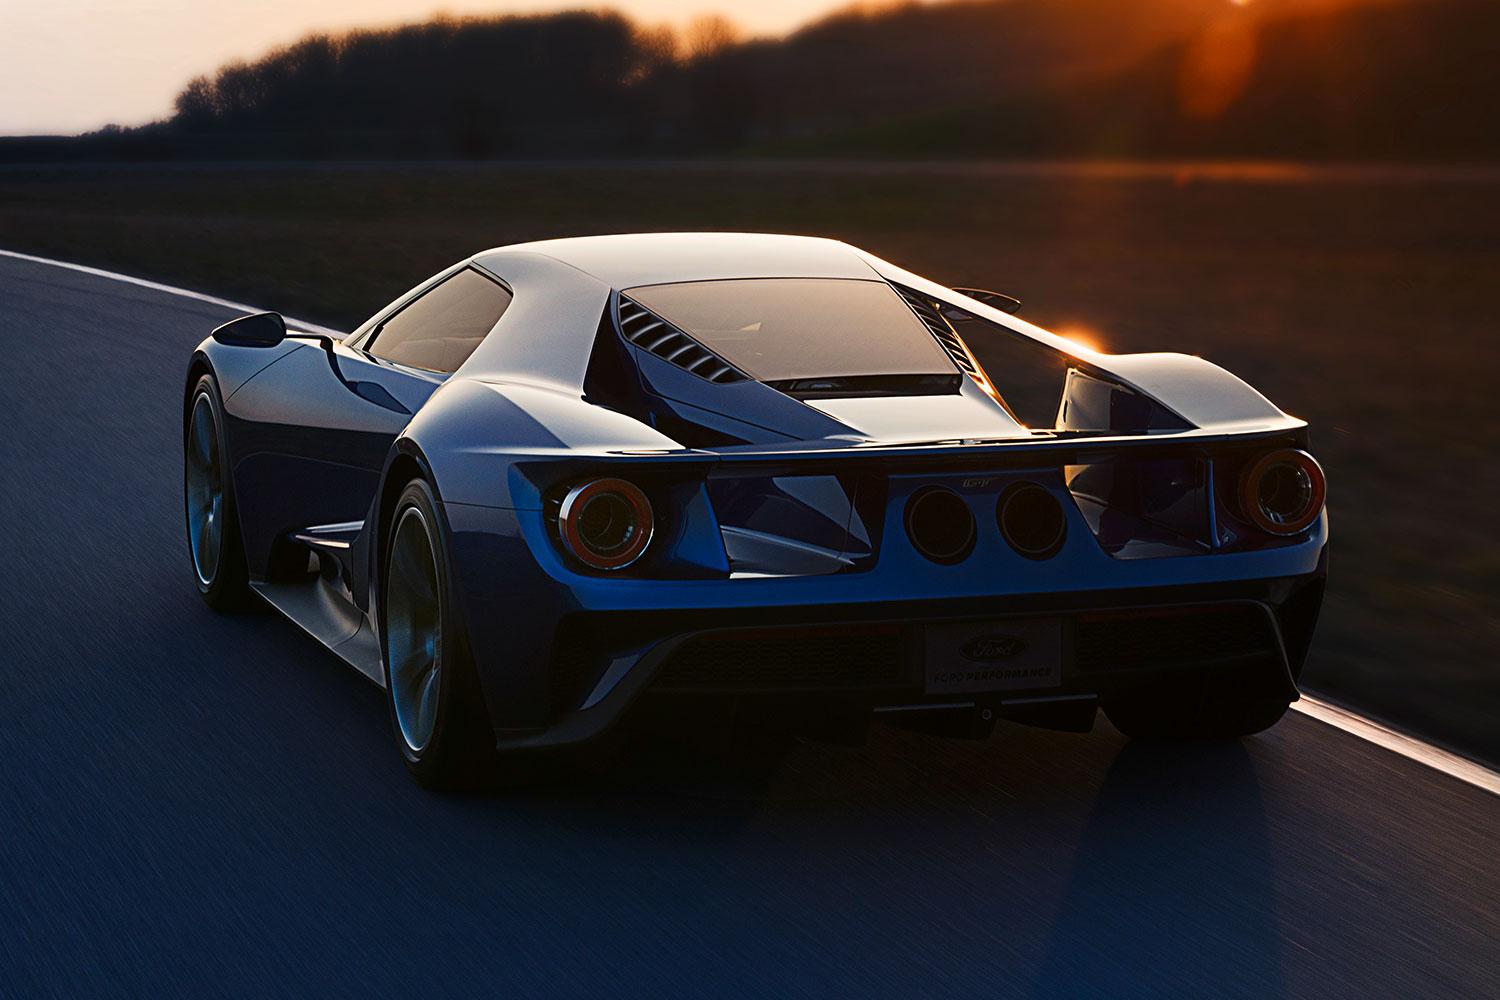 meet the man who sculpted softer side of fords hardcore 2016 gt all newfordgt 01